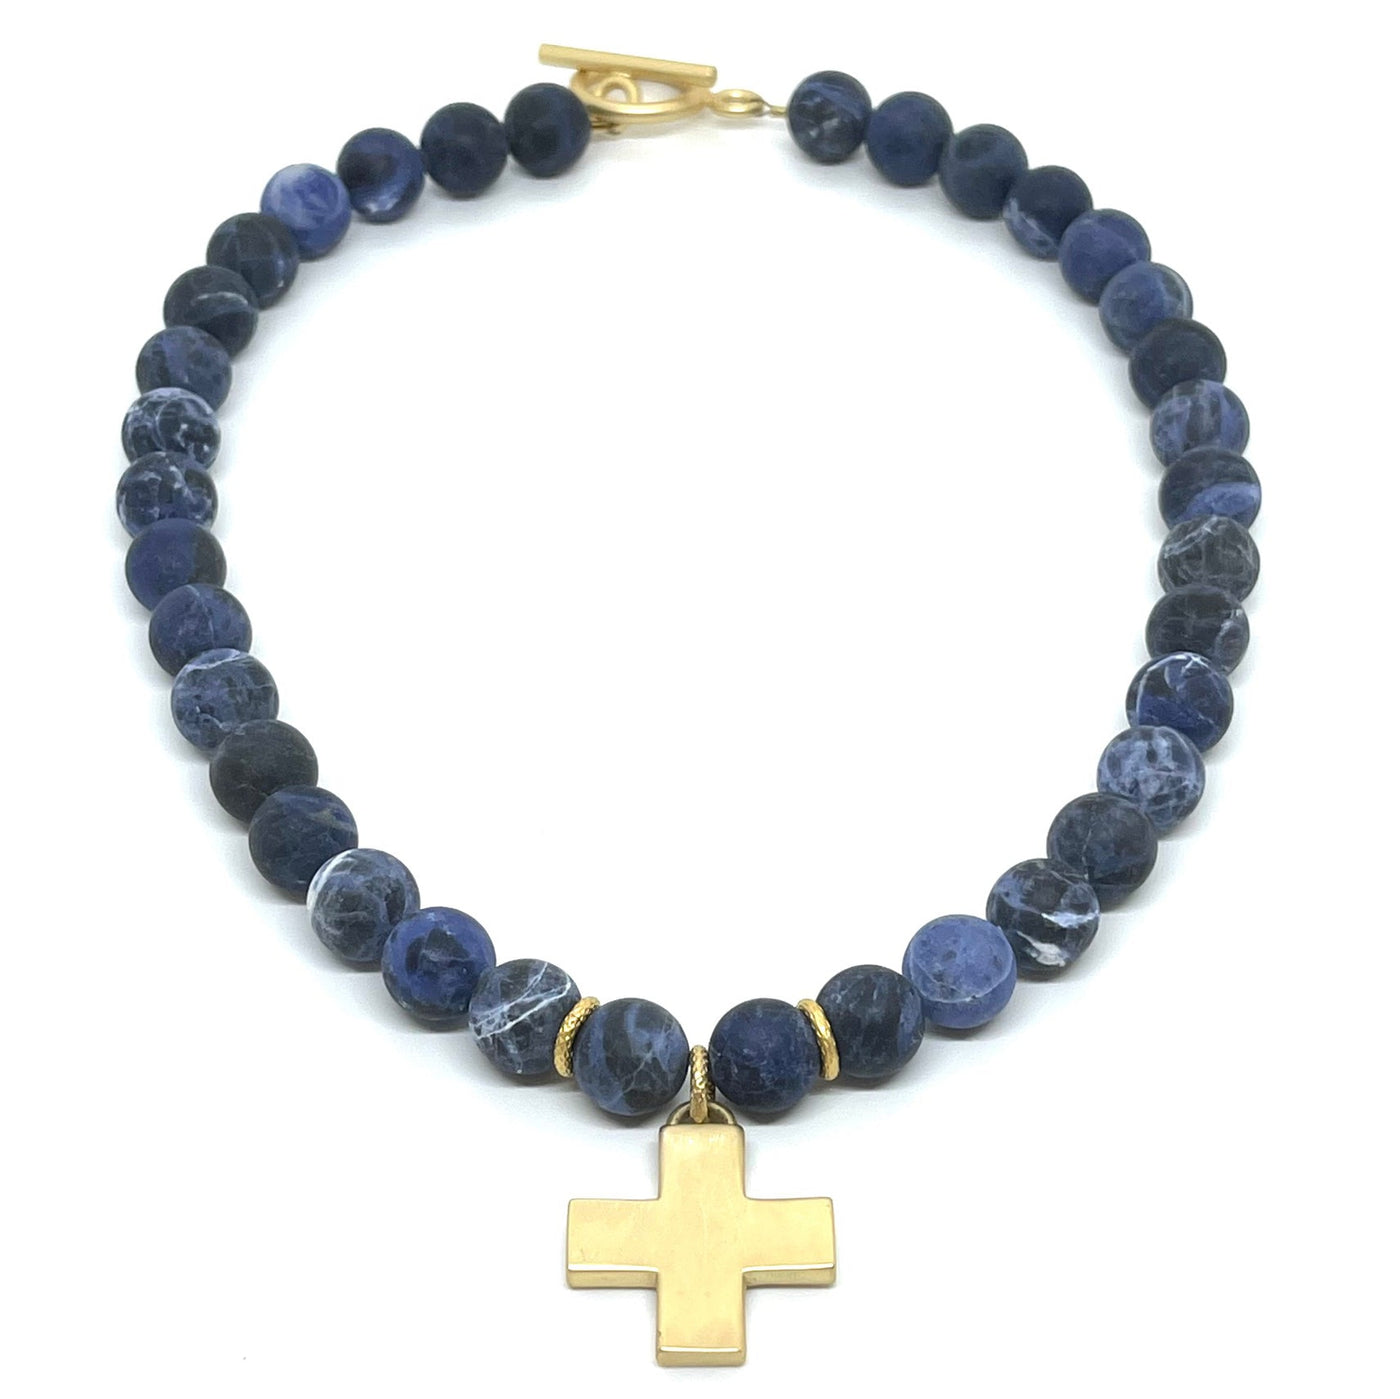 Matte Sodalite Beaded Necklace With Matte Gold Cross Pendant